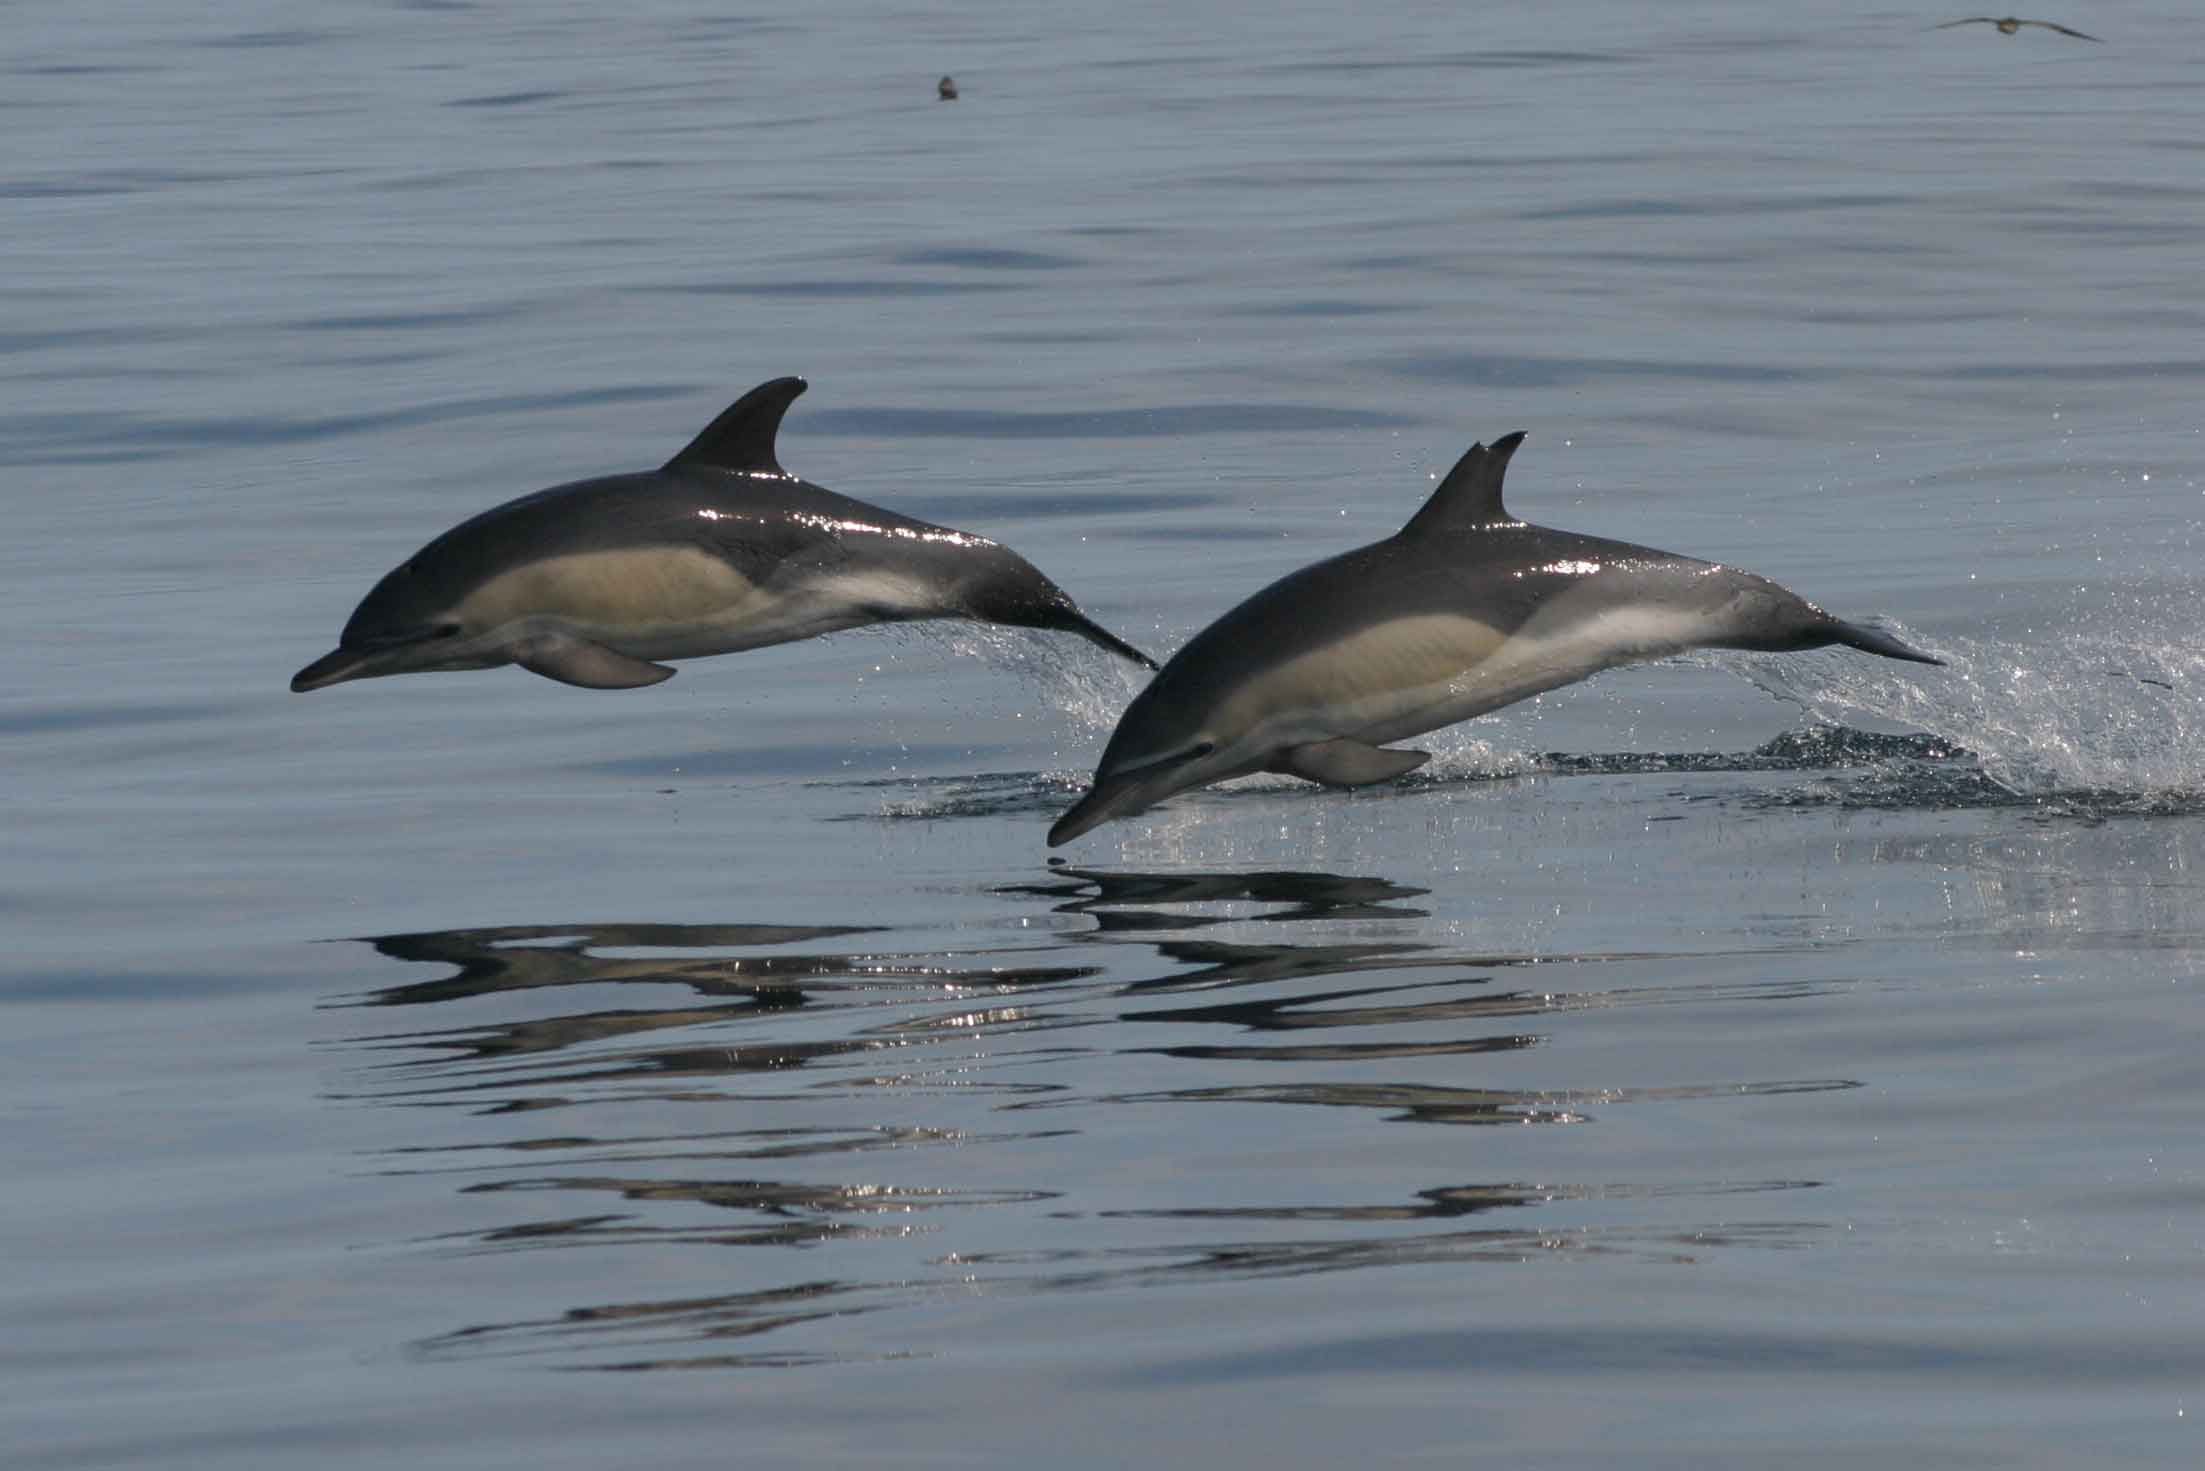 Two common dolphins jumping out of the water. 